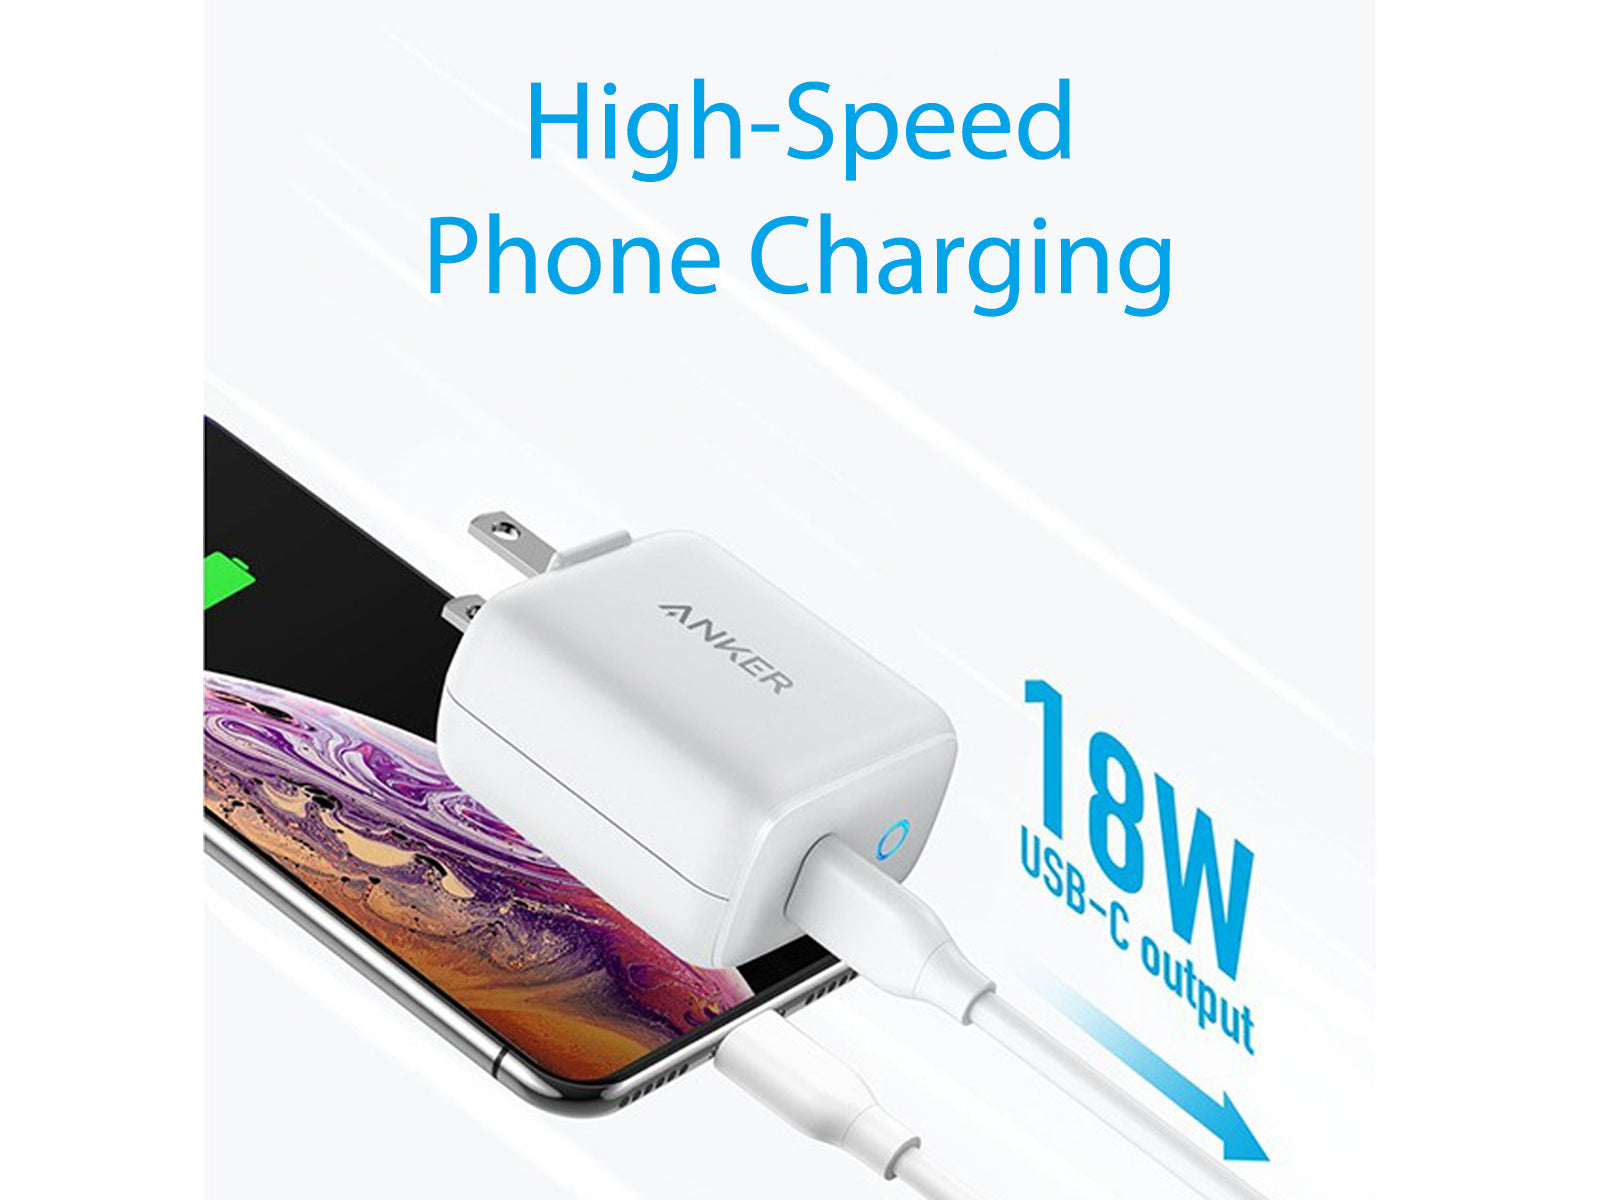 Image shows the high speed charging feature of the Anker PowerPort PD USB-C 18W Fast Charger White